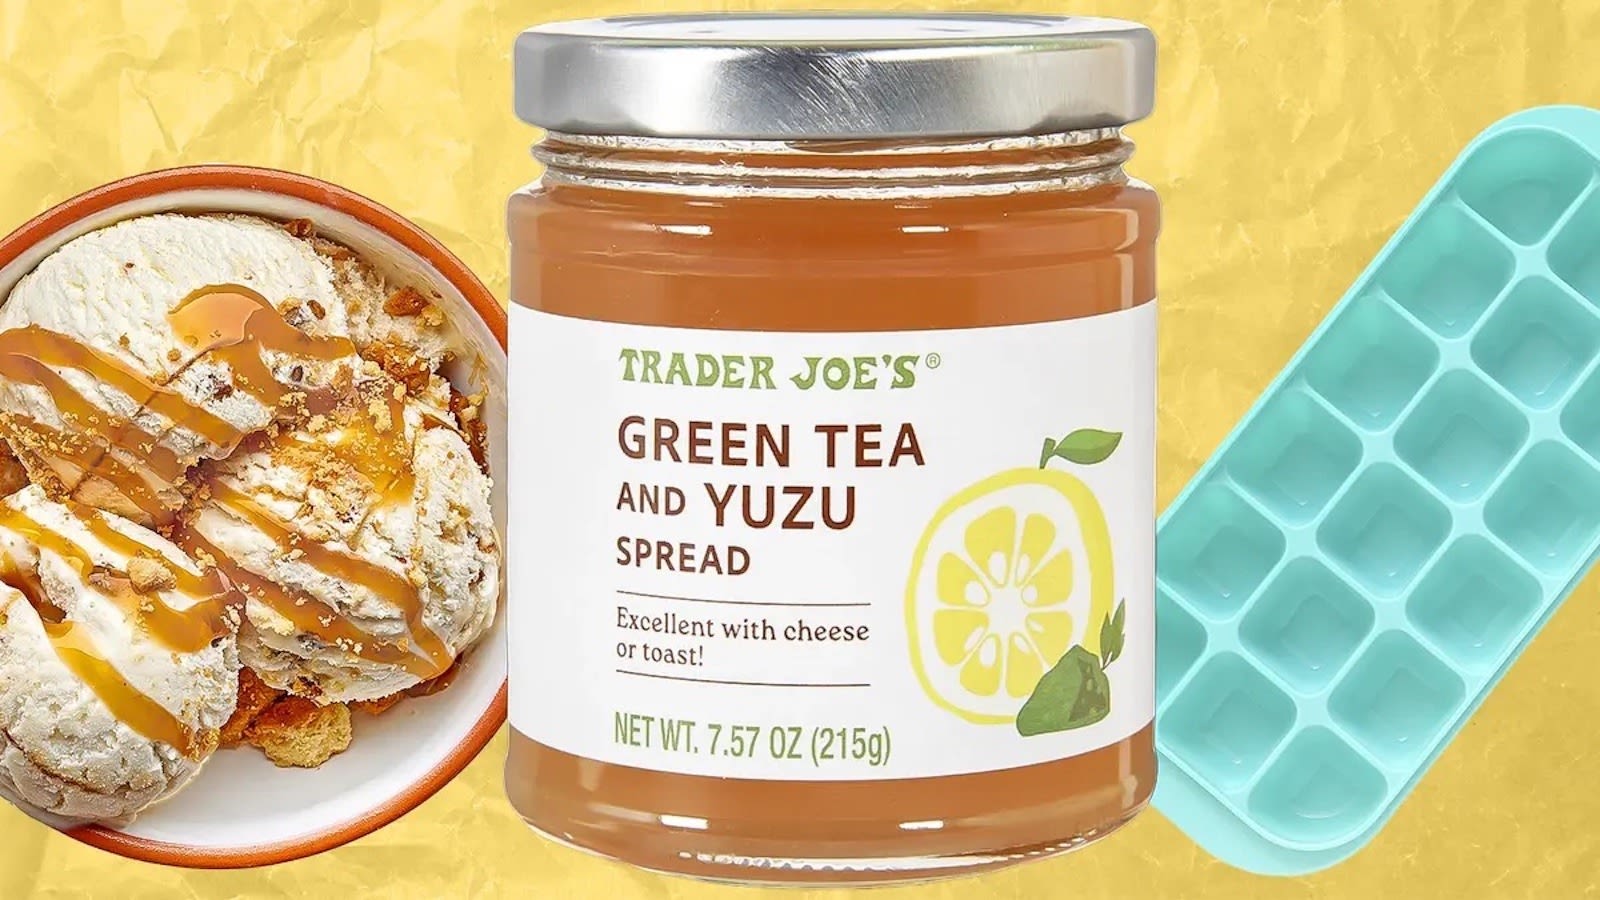 Trader Joe's New Green Tea And Yuzu Spread Has More Creative Uses Than You Expect